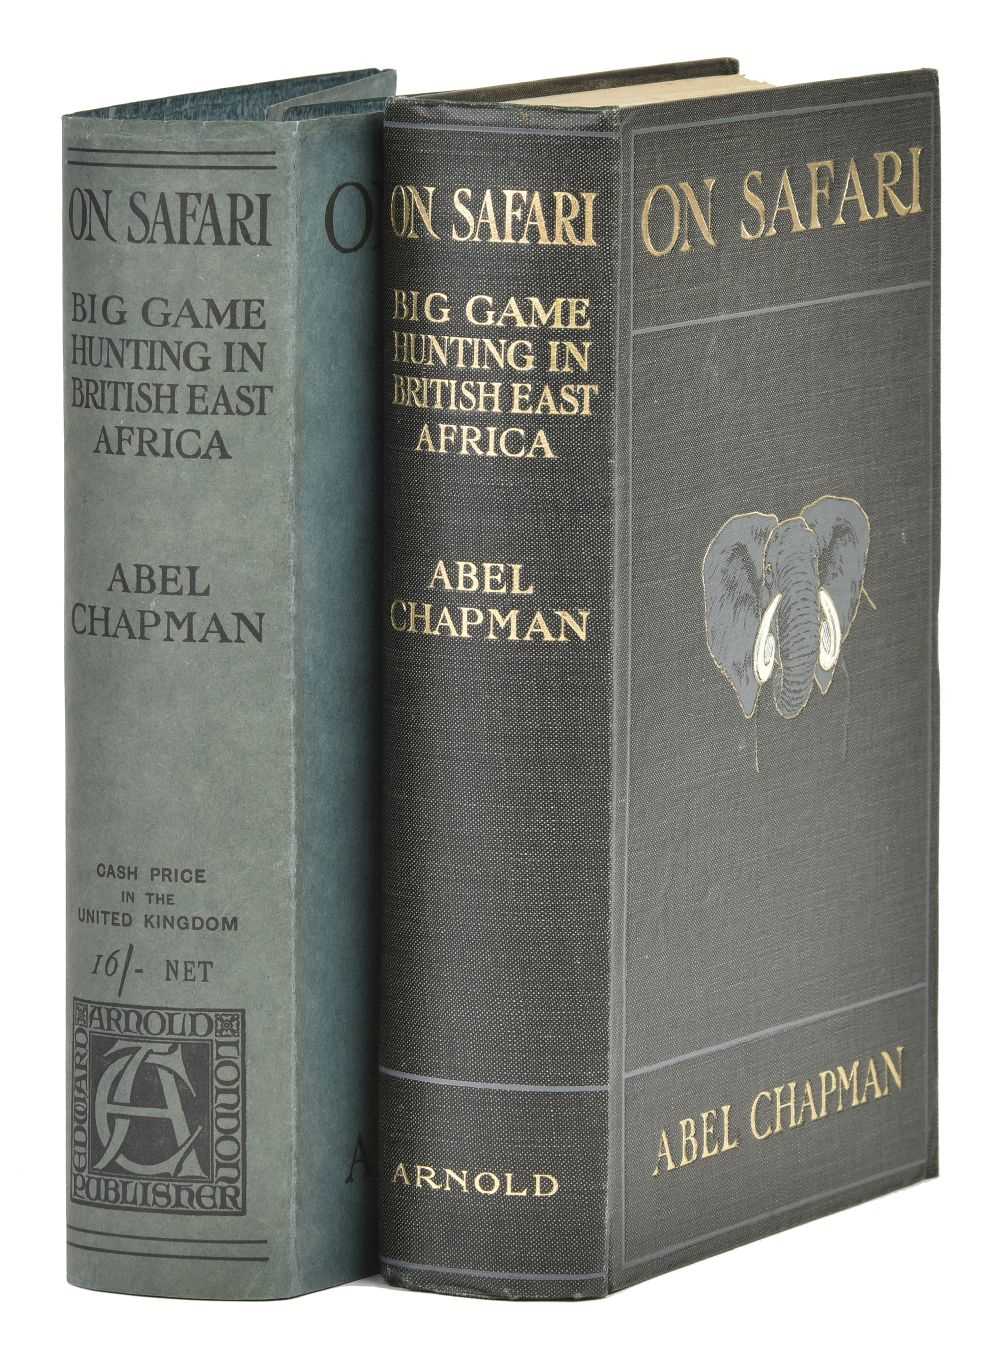 Lot 73 - Chapman (Abel). On Safari, 1st edition, 1908, with the rare dust jacket